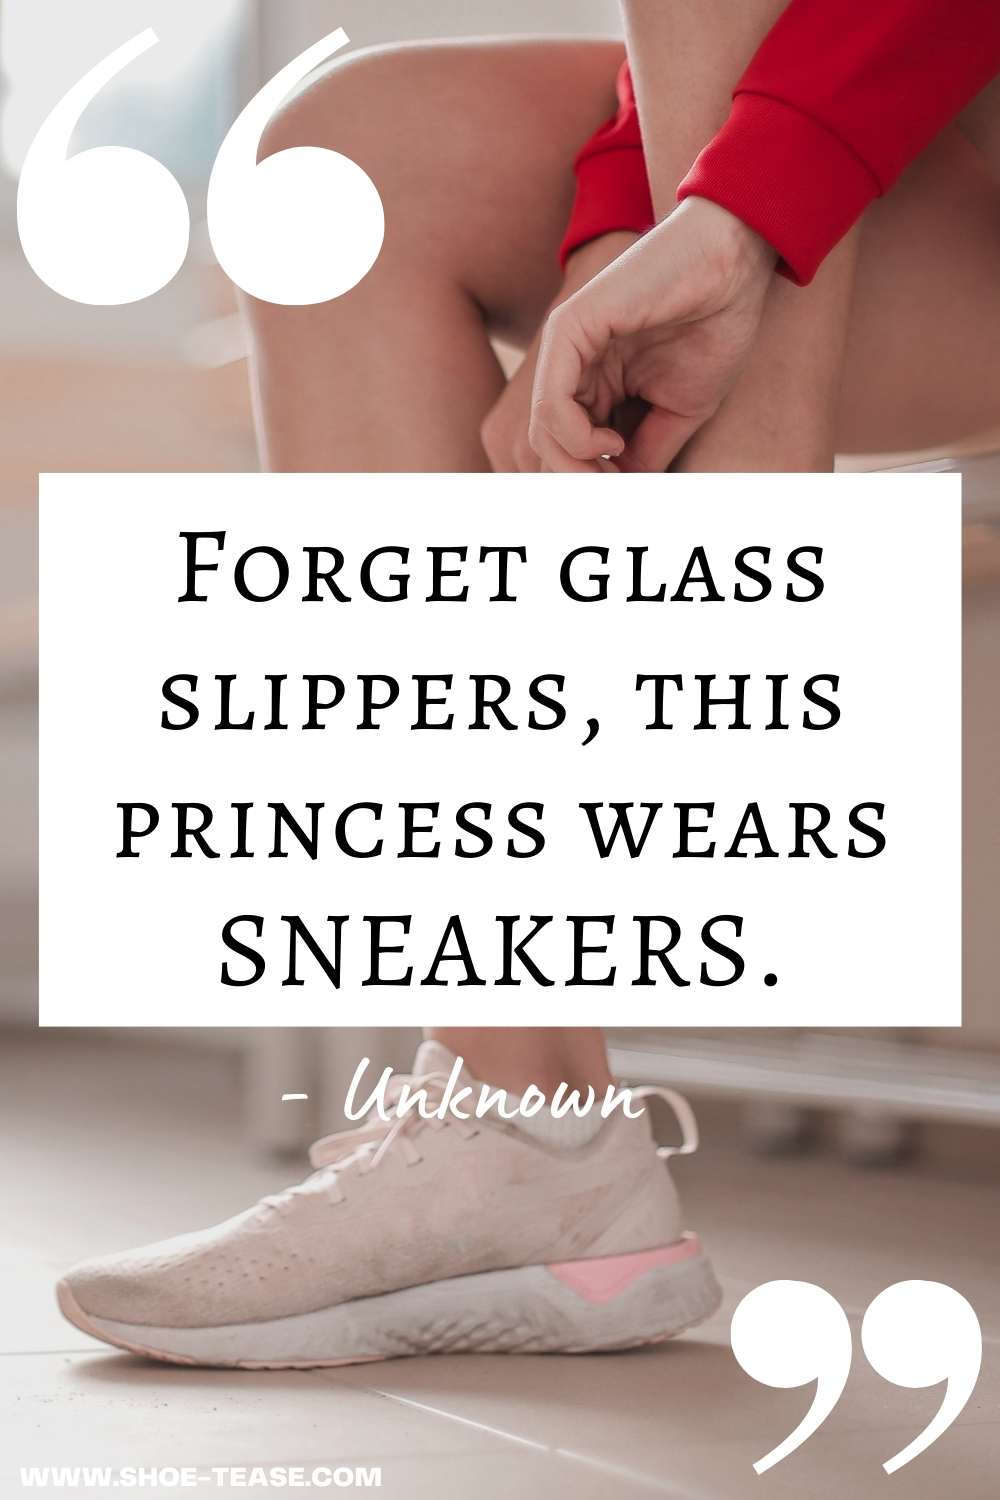 Sneakers Quote reading Forget glass slippers, this princess wears sneakers over image of women putting on sneakers.